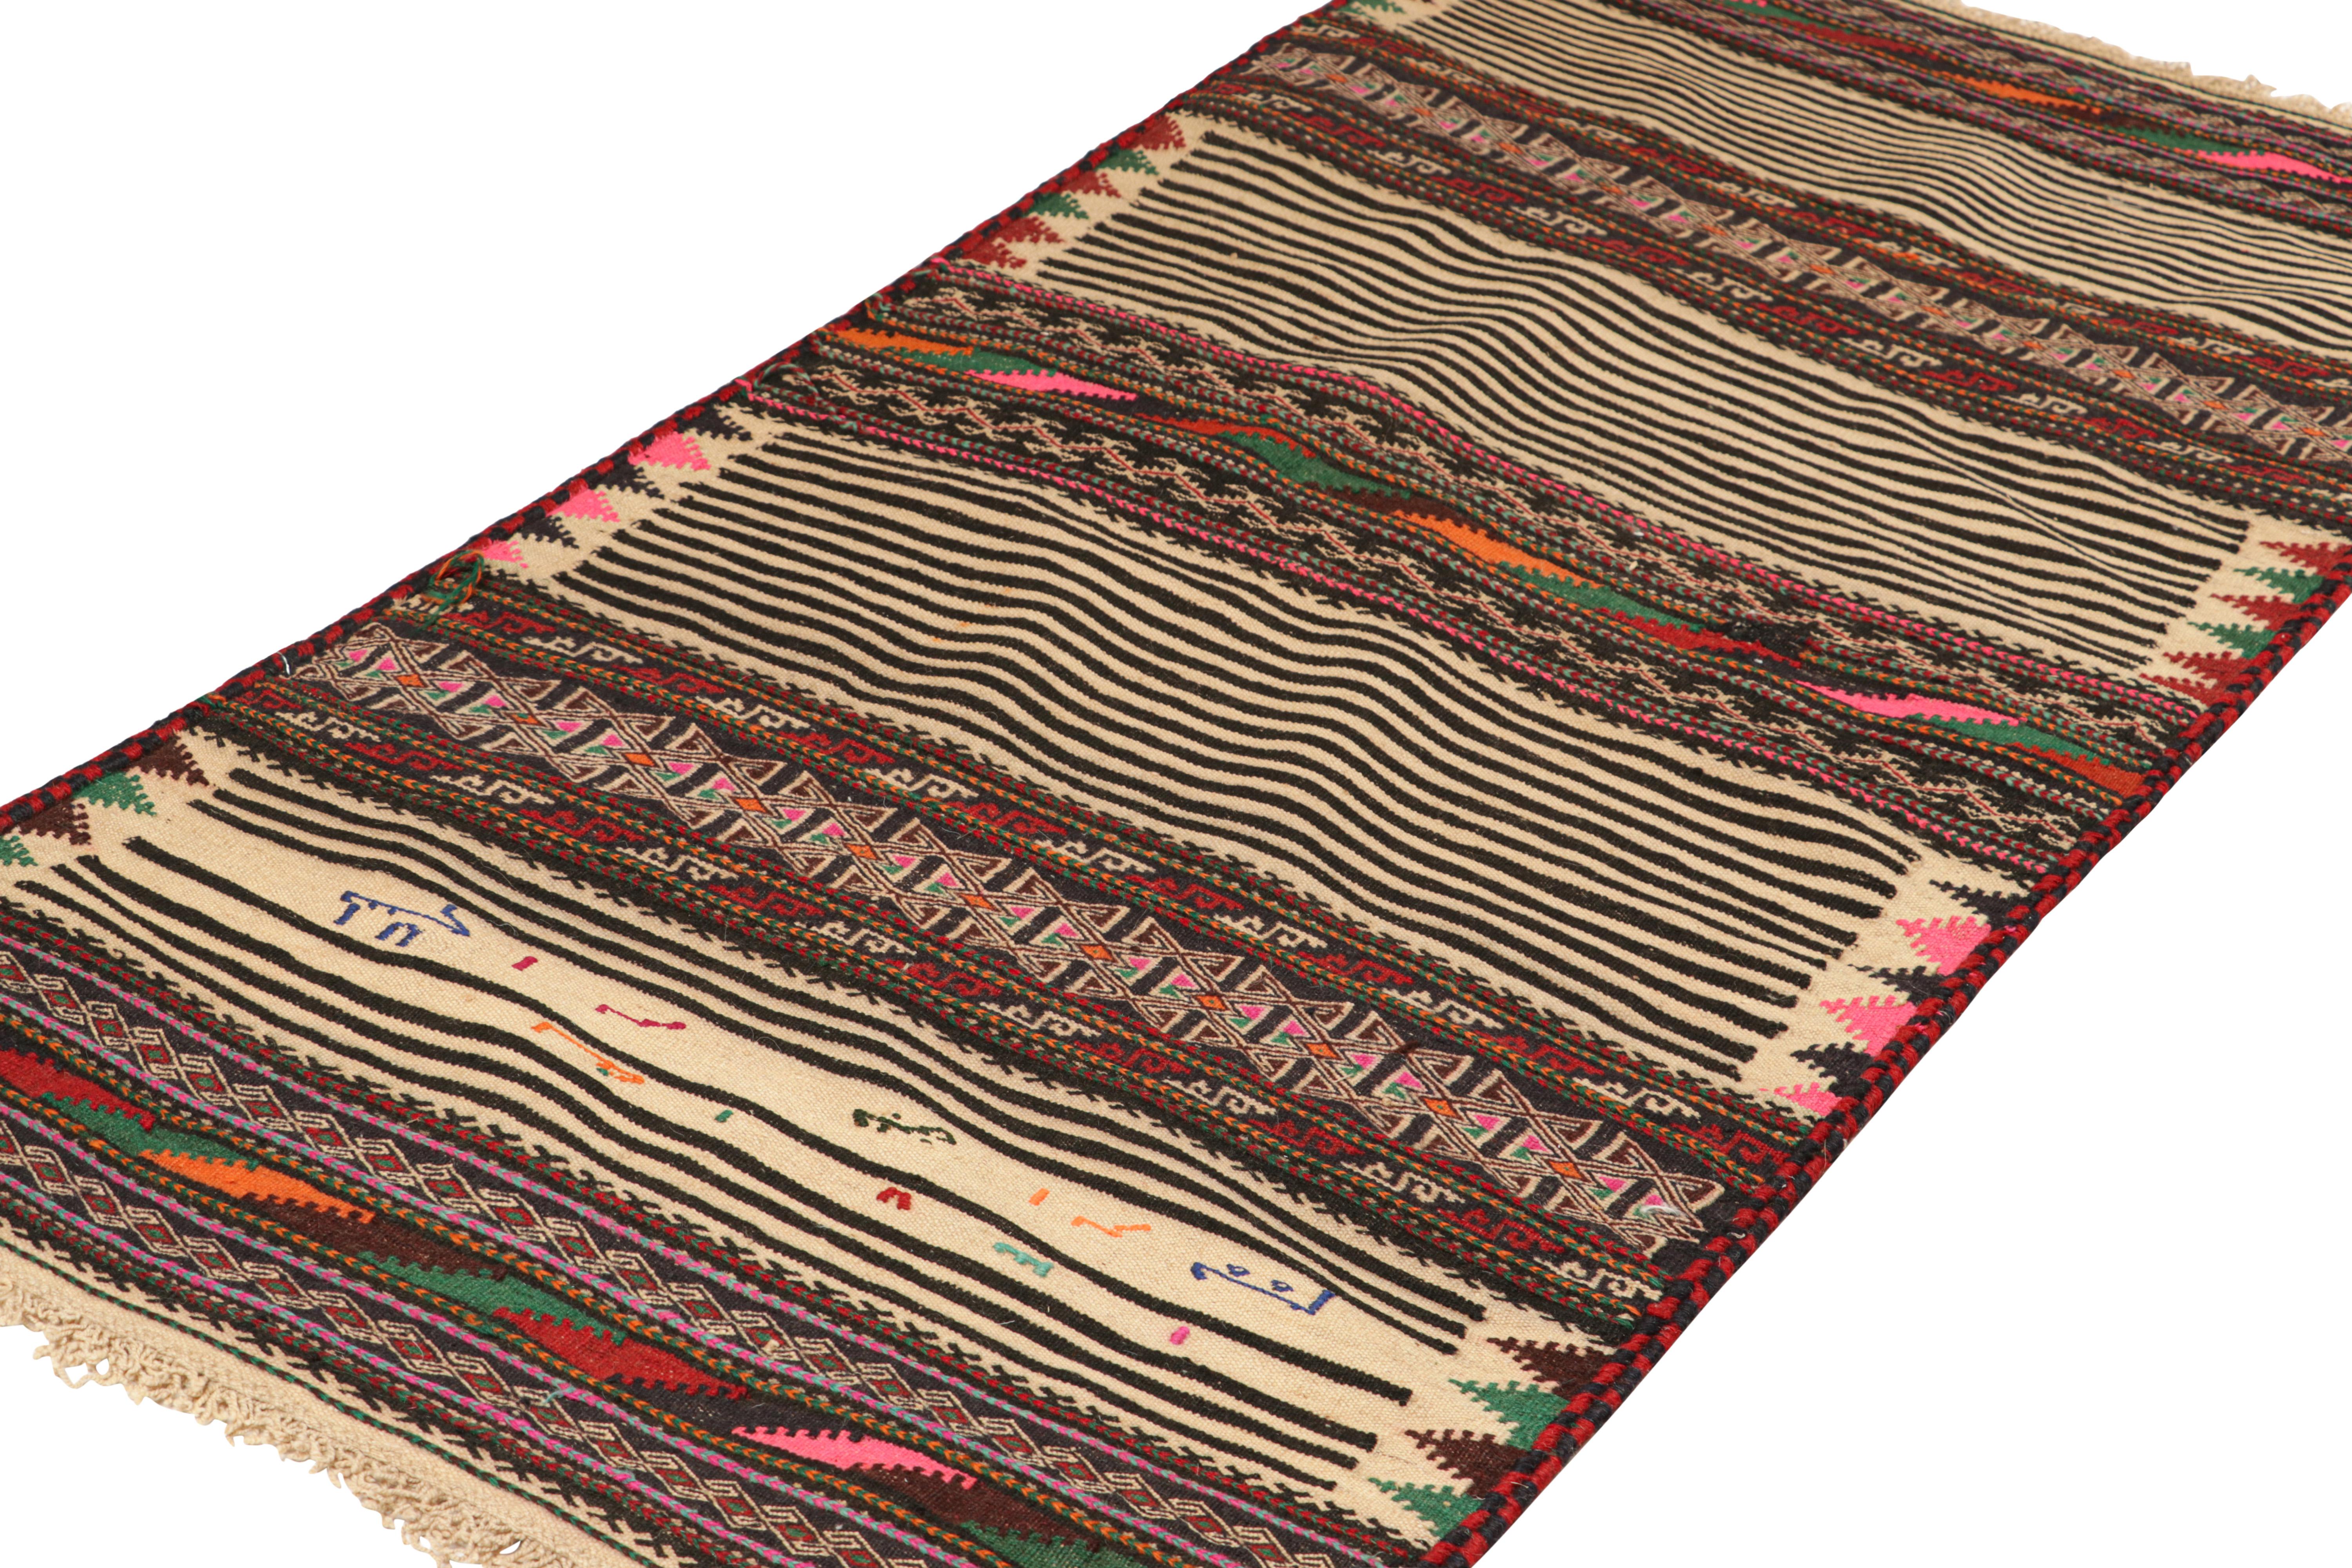 Hand-Woven Vintage Afghan Kilim with Polychromatic Geometric Patterns, from Rug & Kilim For Sale